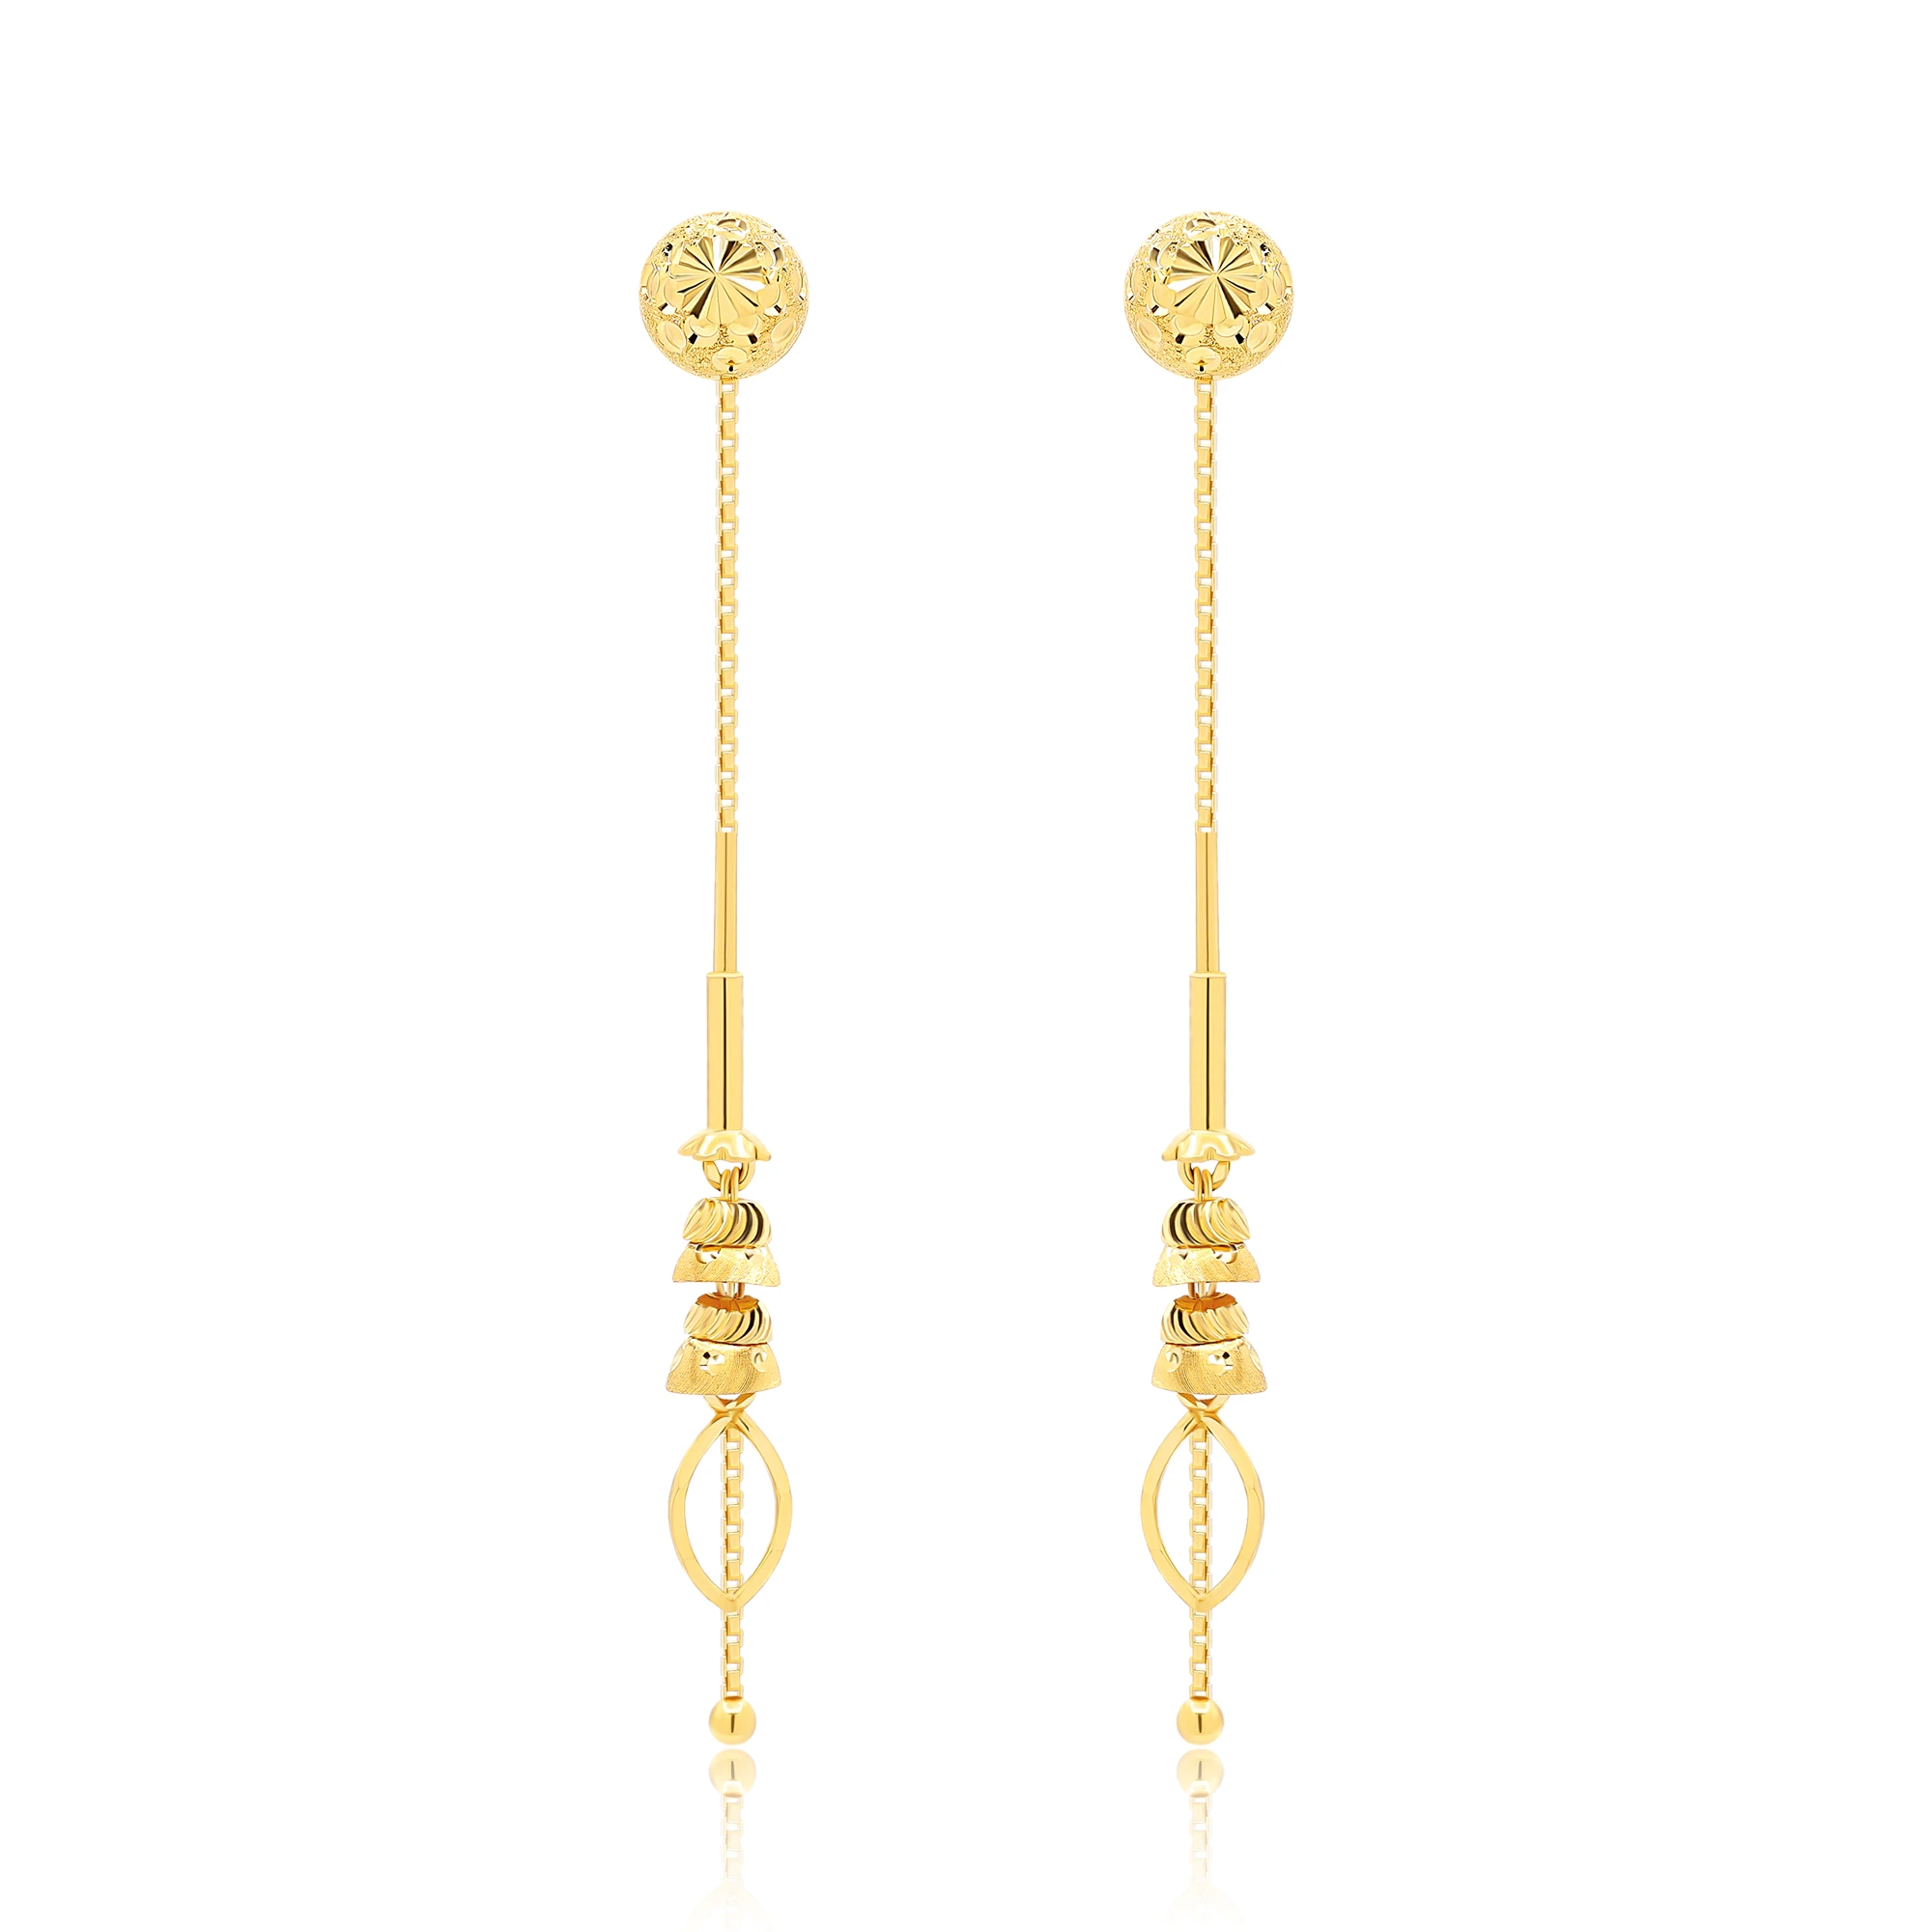 22K Gold Sui Dhaga Earrings (3.50G) - Queen of Hearts Jewelry